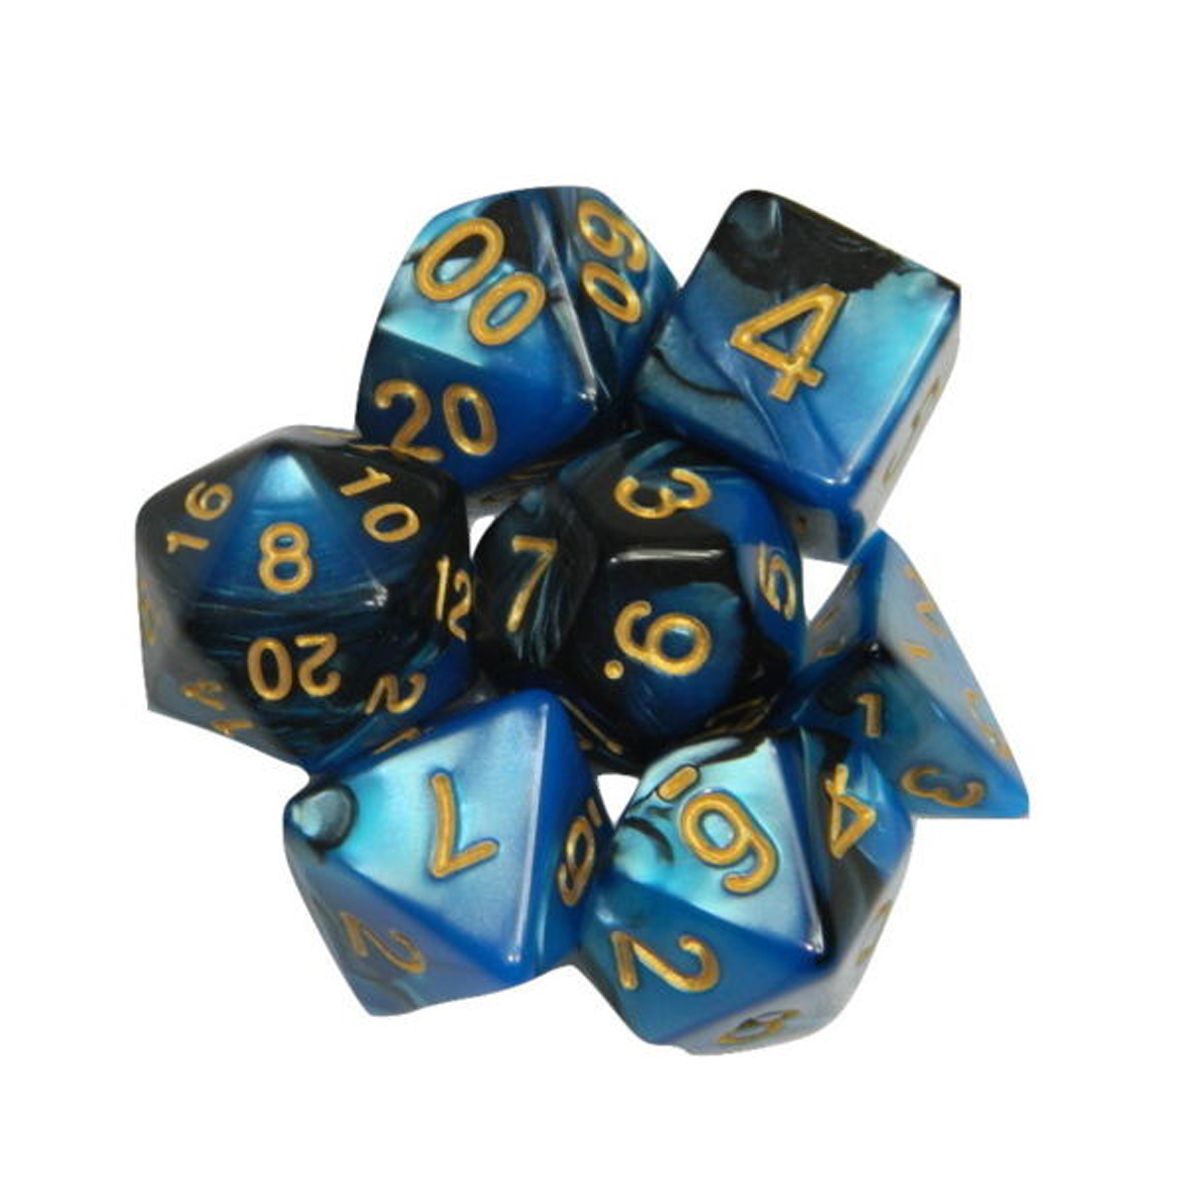 21-Pcs-3-Colrs-Polyhedral-Dice-Sets-Multisided-Dice-Role-Playing-Game-Dice-Gadget-1254658